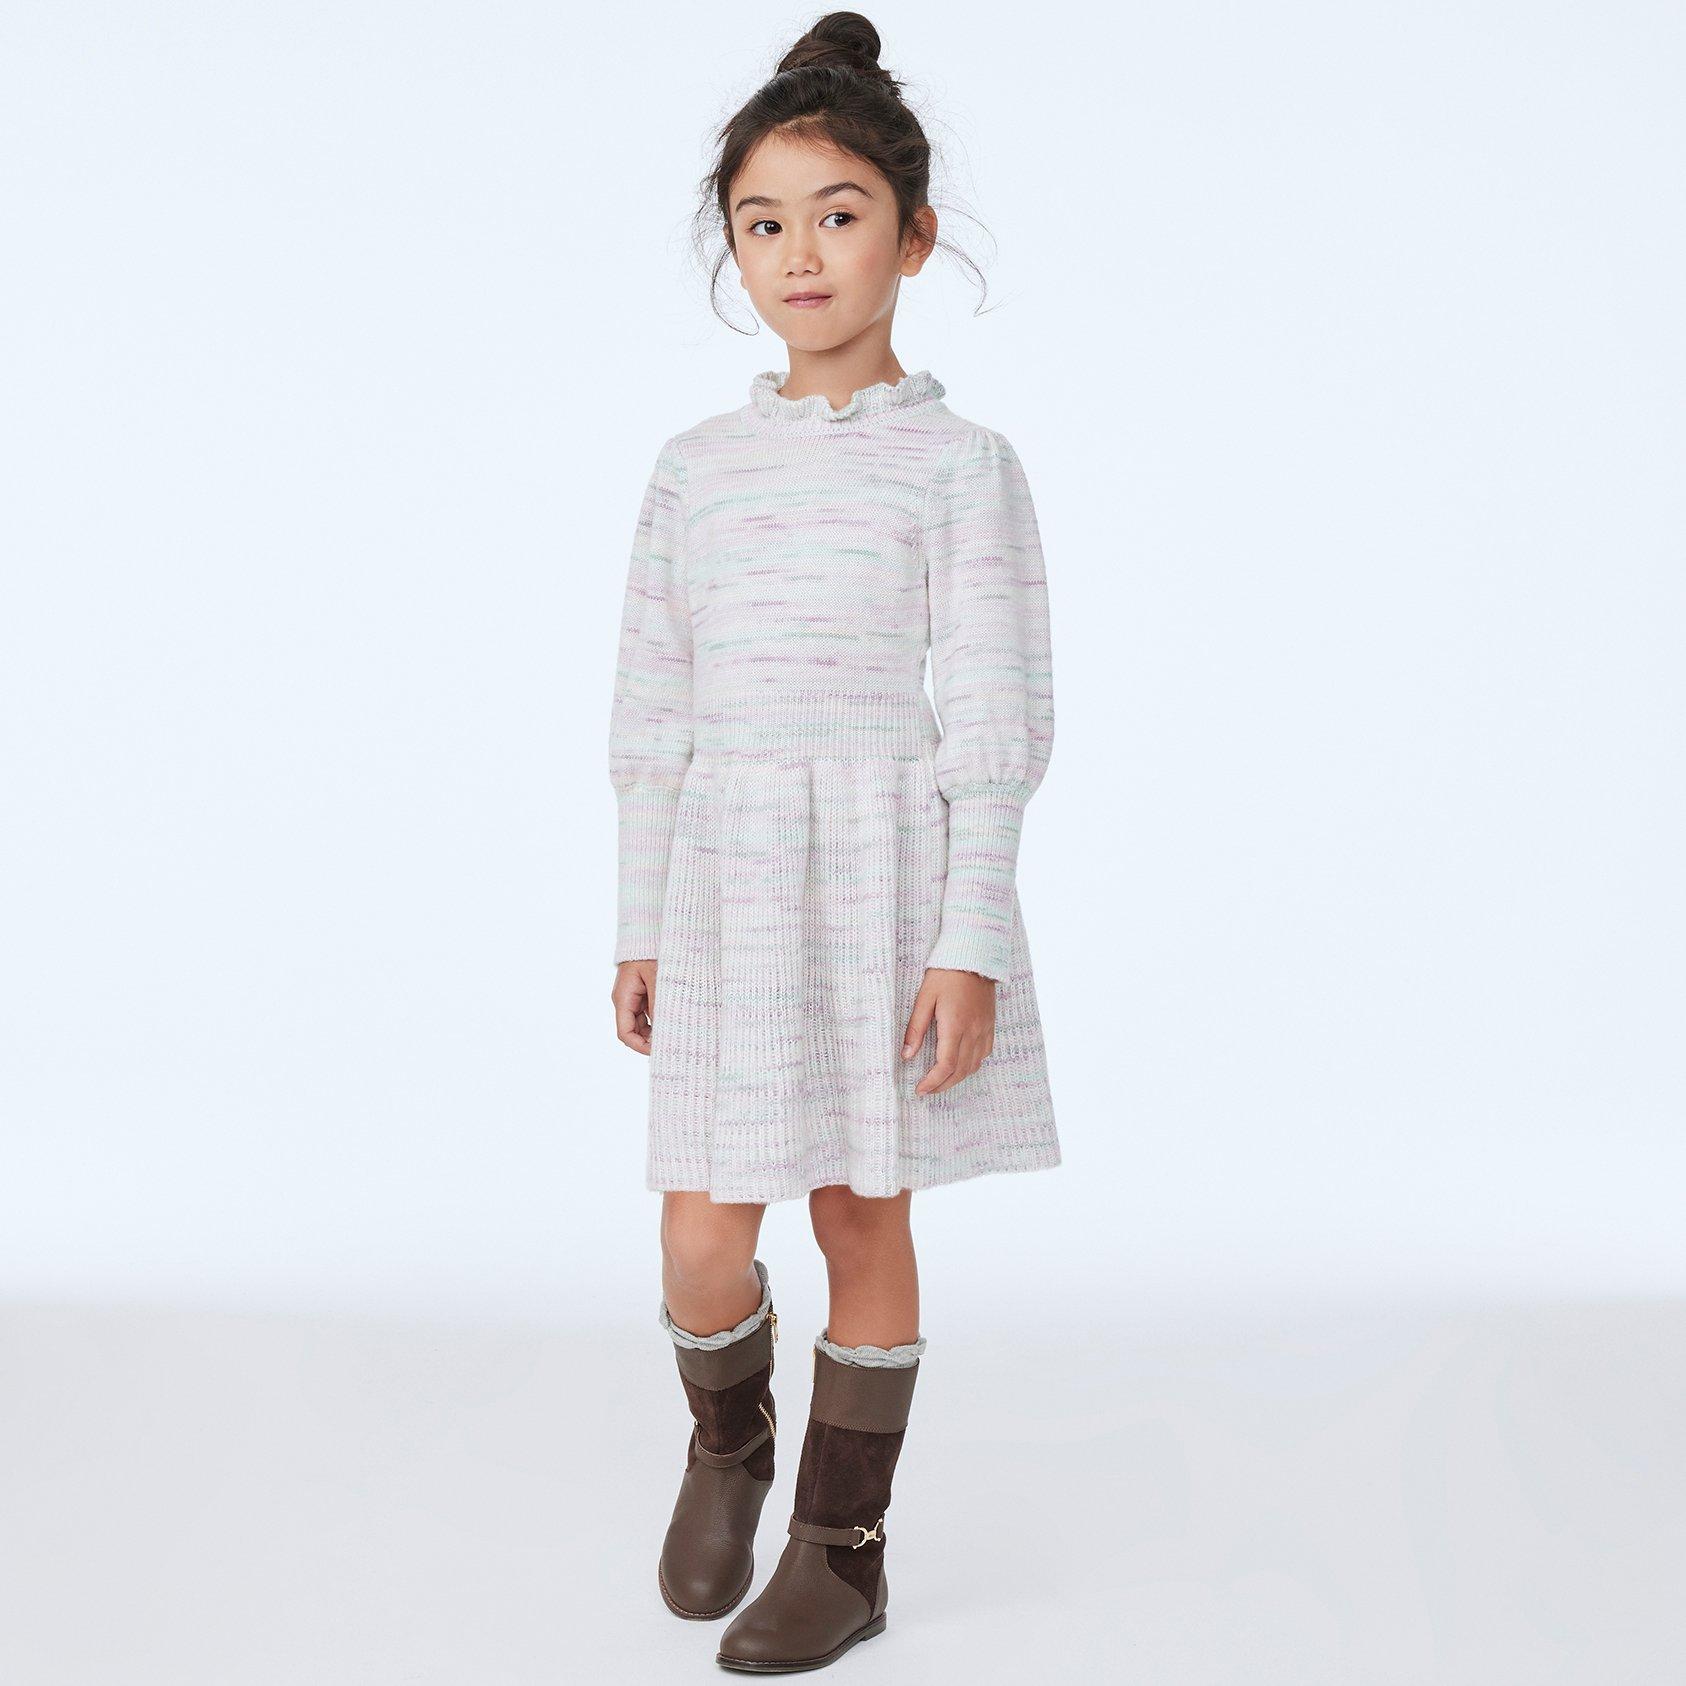 The Cozy Marled Sweater Dress